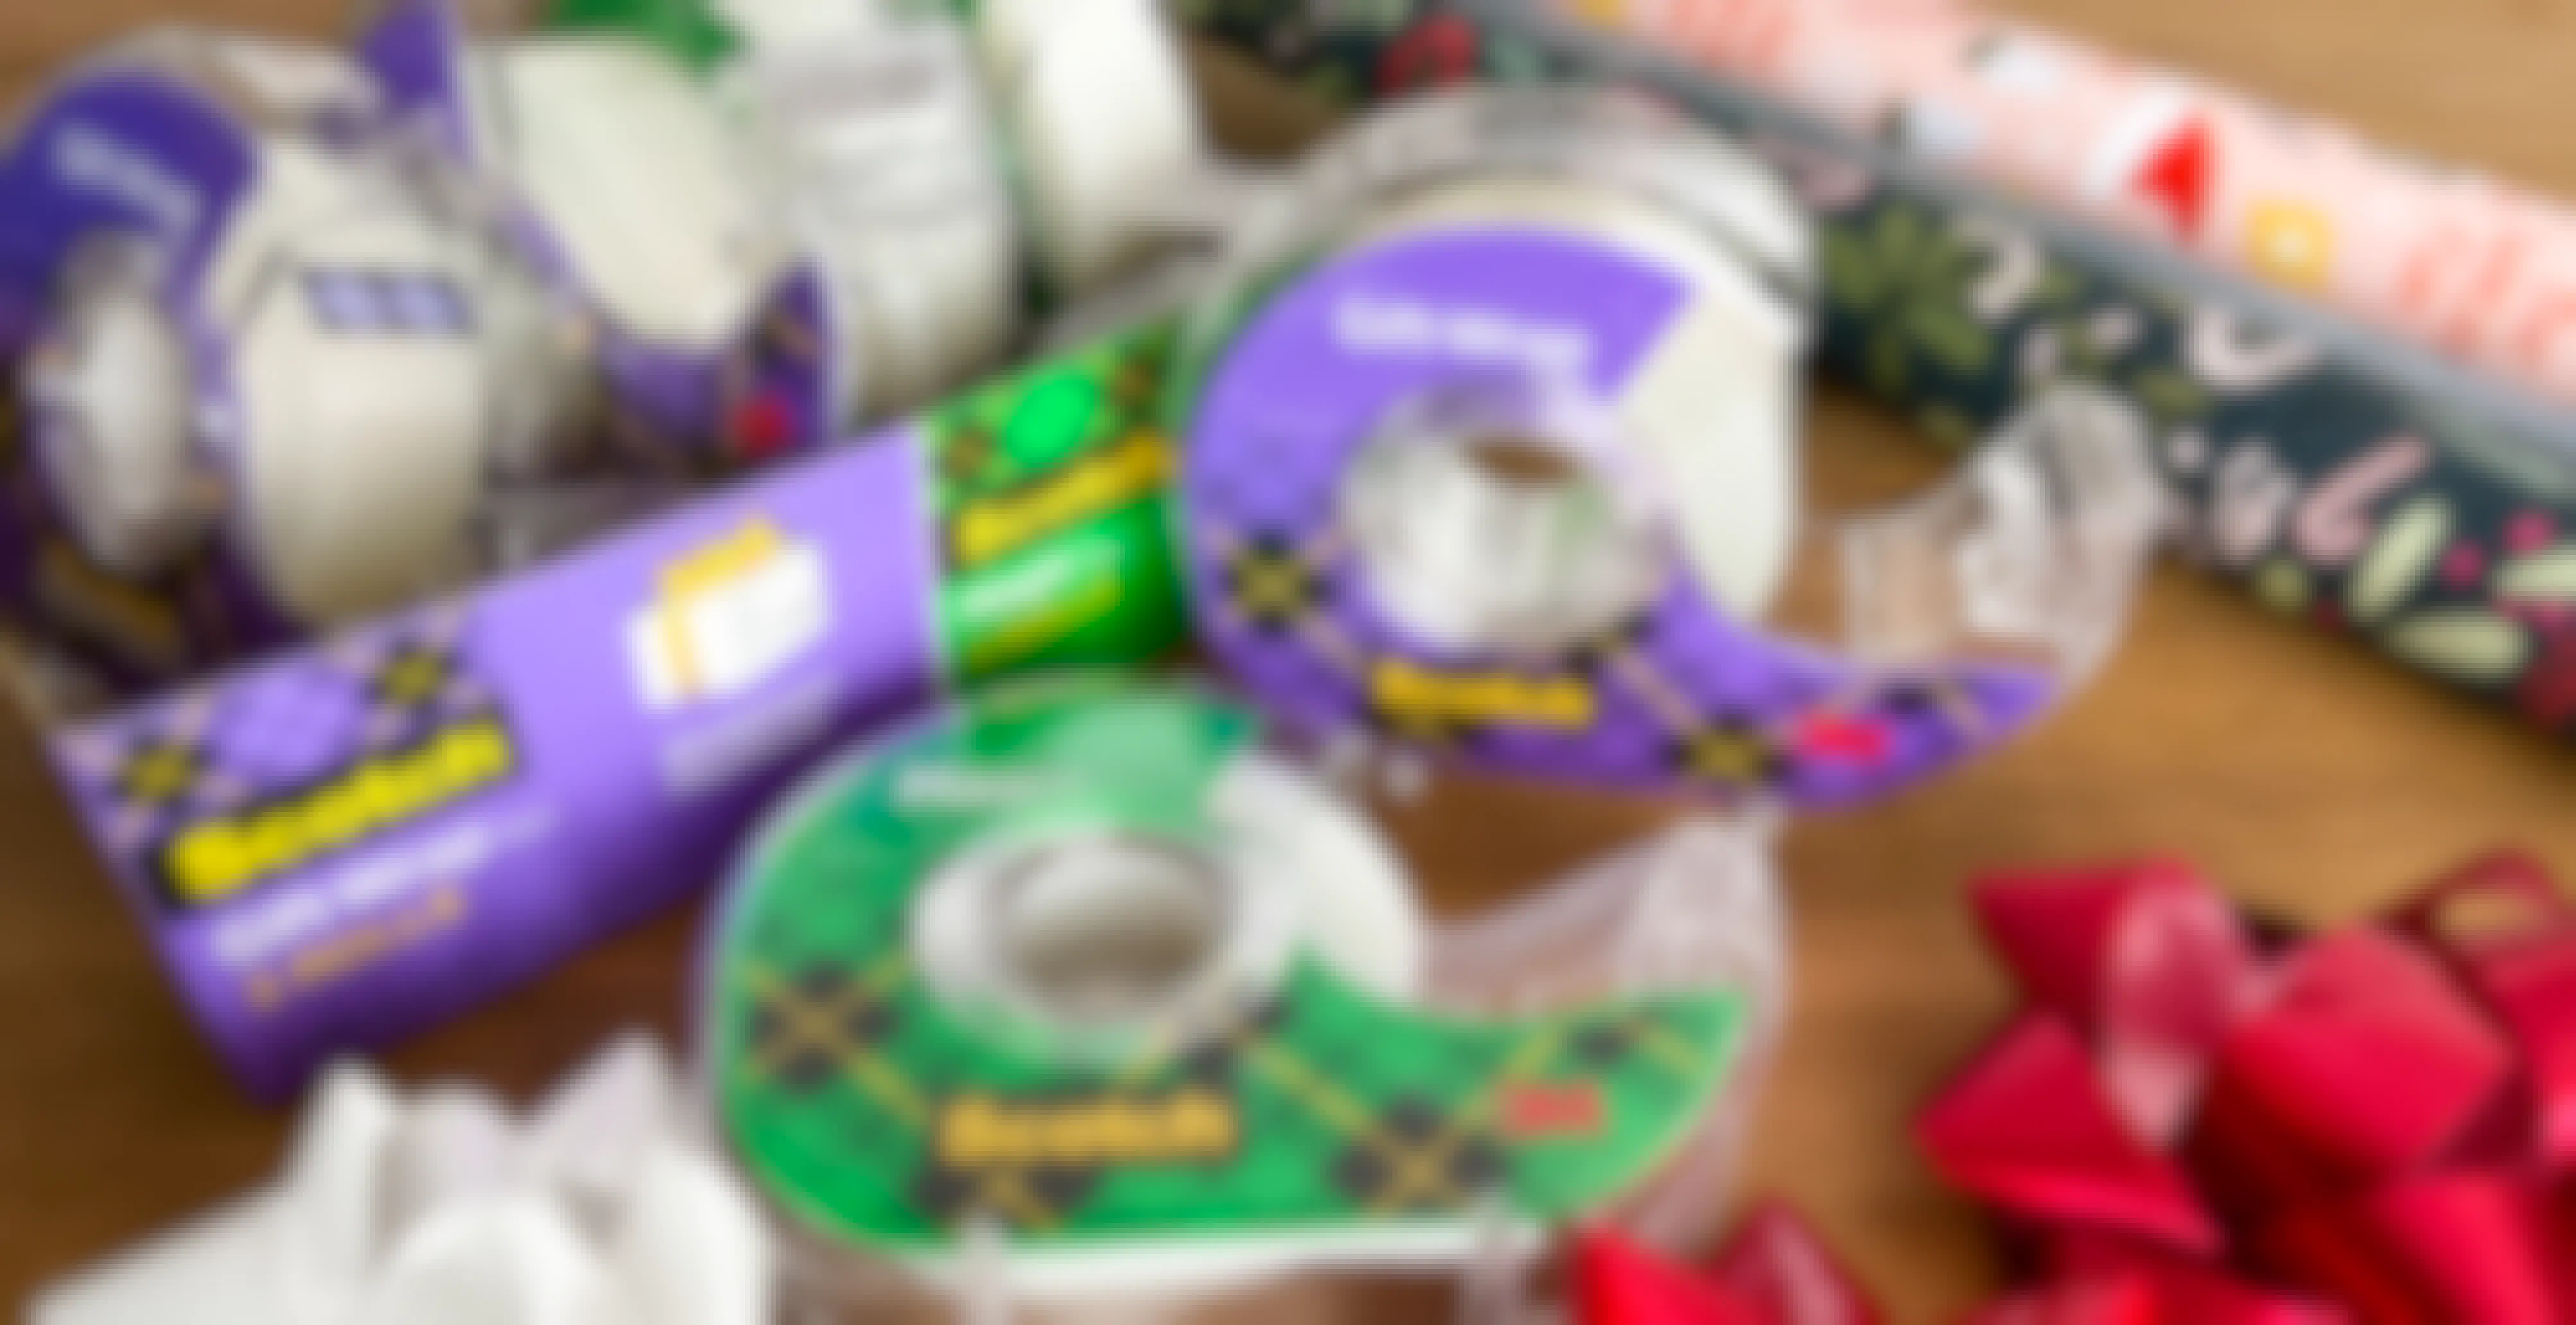 Where to Buy Scotch Tape to Stock Up for Holiday Wrapping